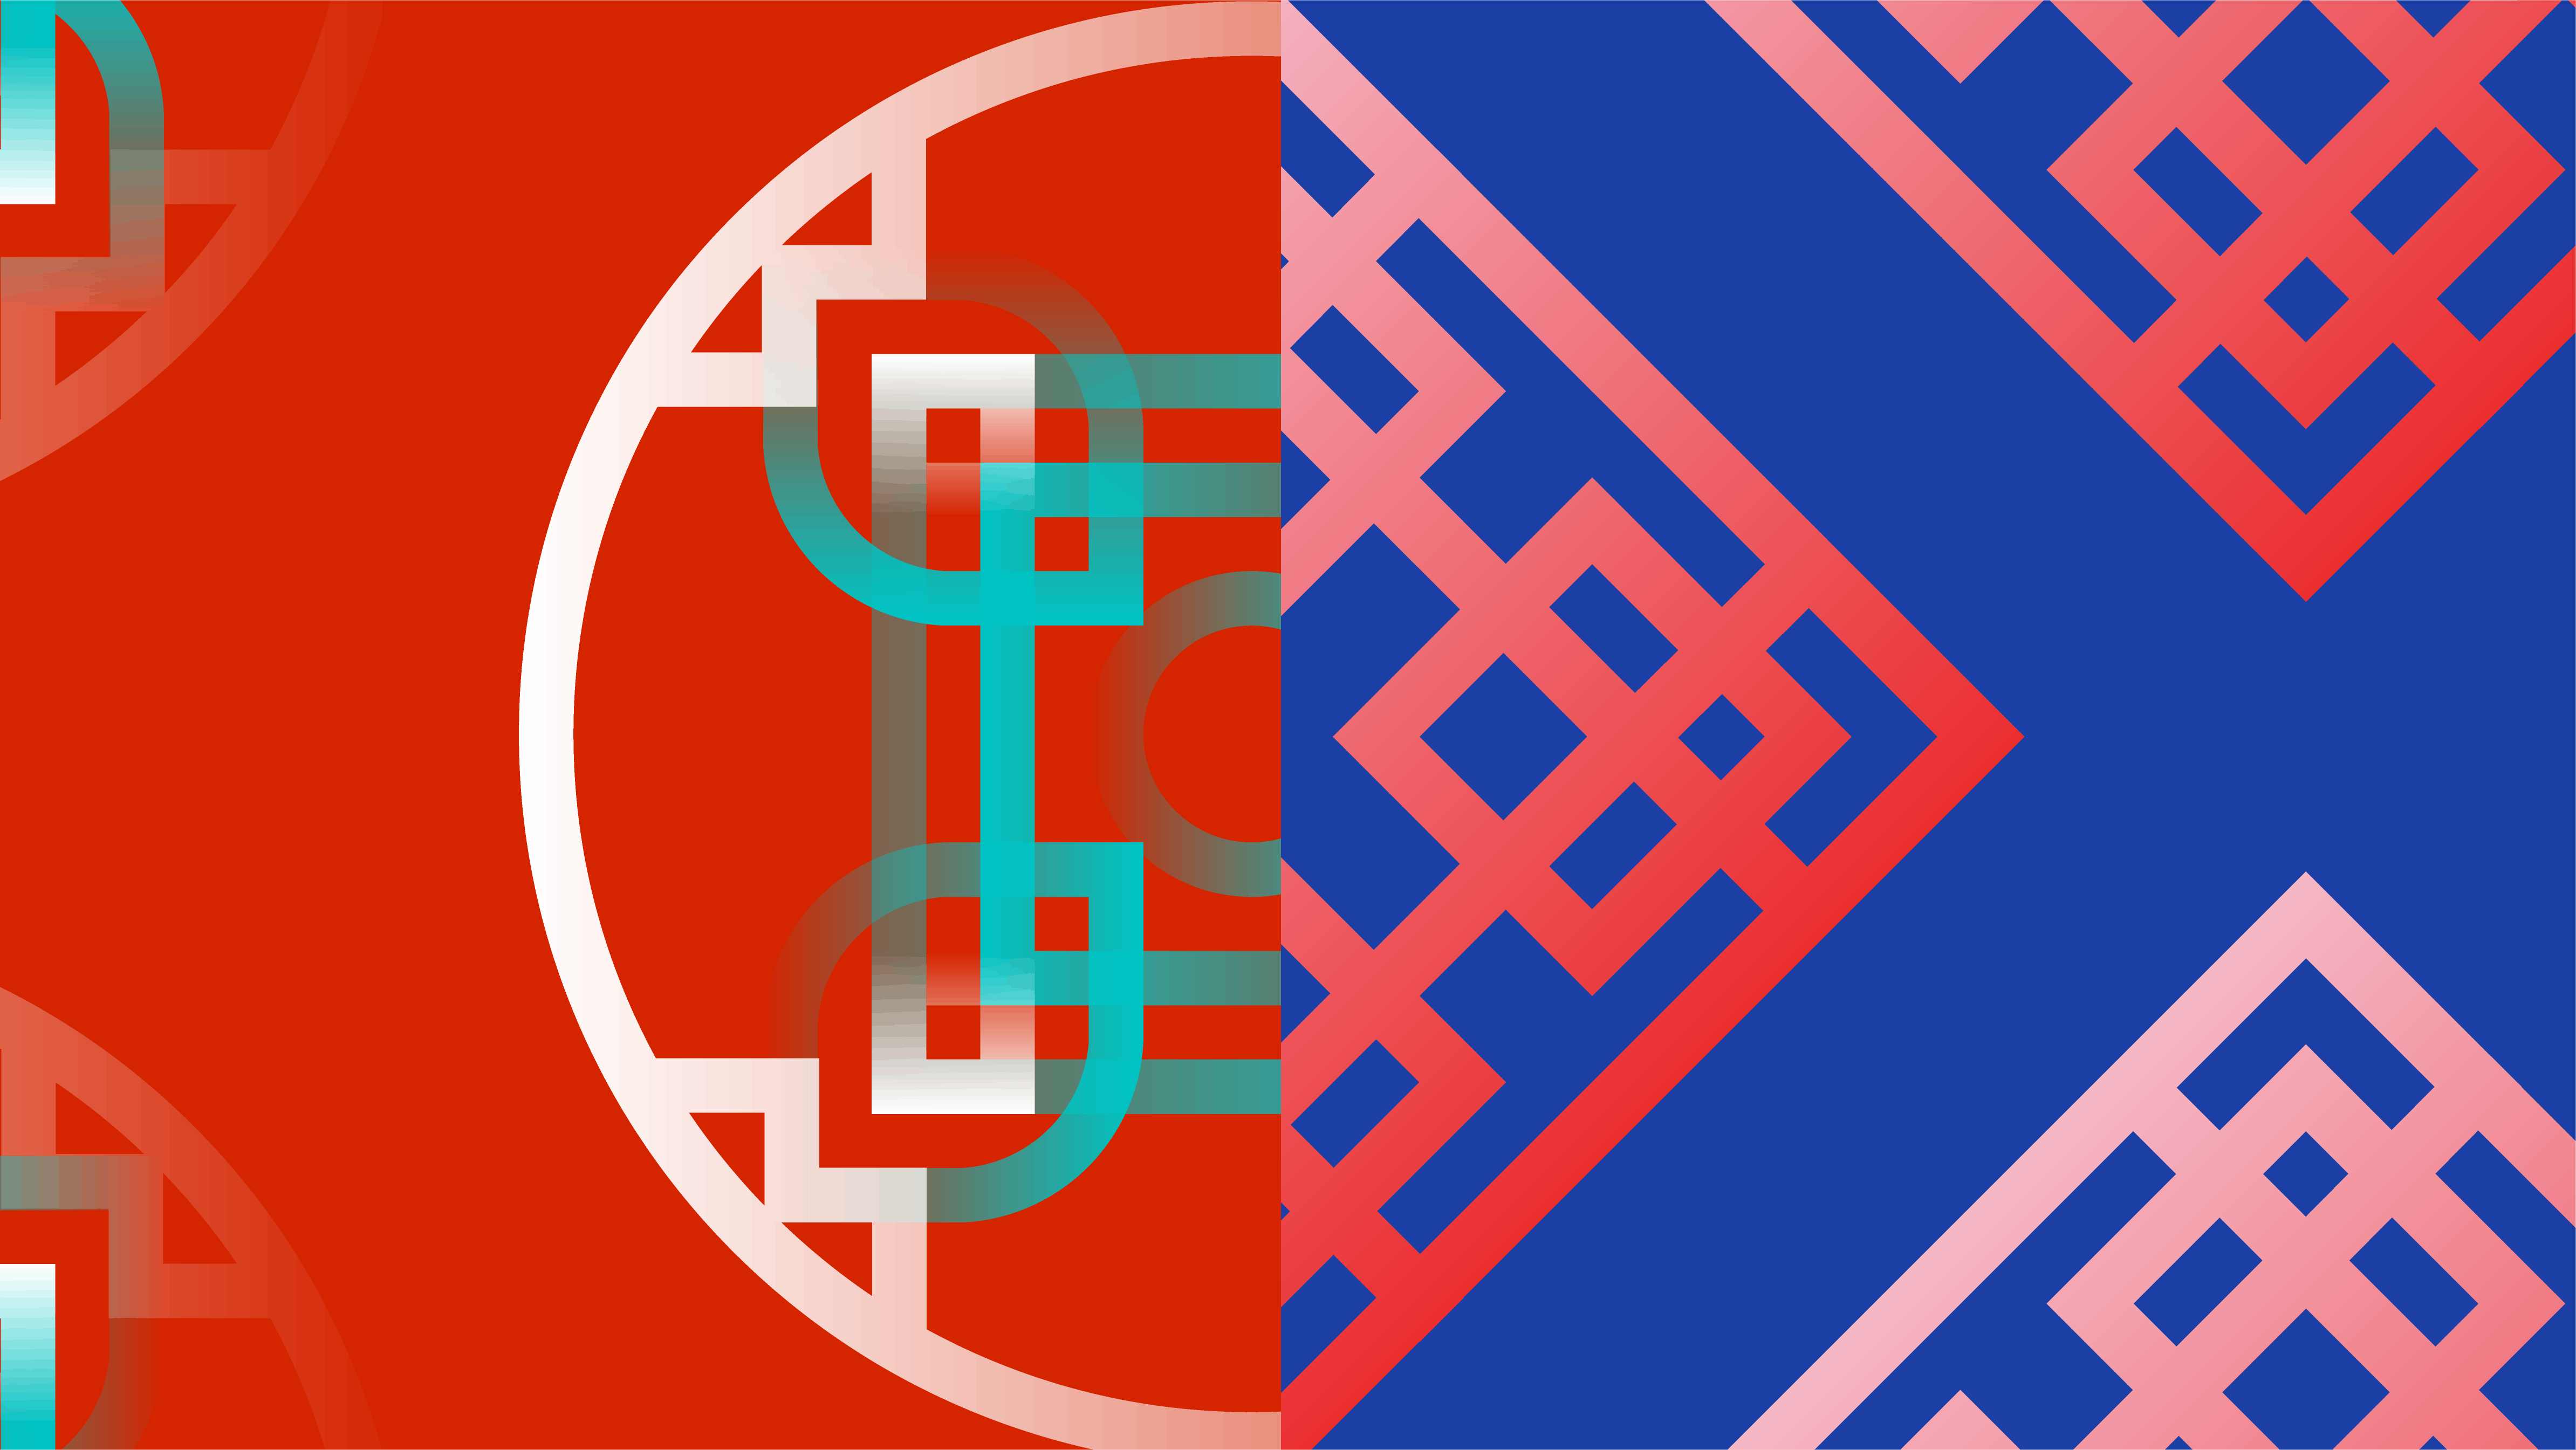 A split digital image with the emblem used for the Japan Summit enlarged and repeated on a red background on the left and the emblem used for the South Korea Summit enlarged and repeated on a blue background.